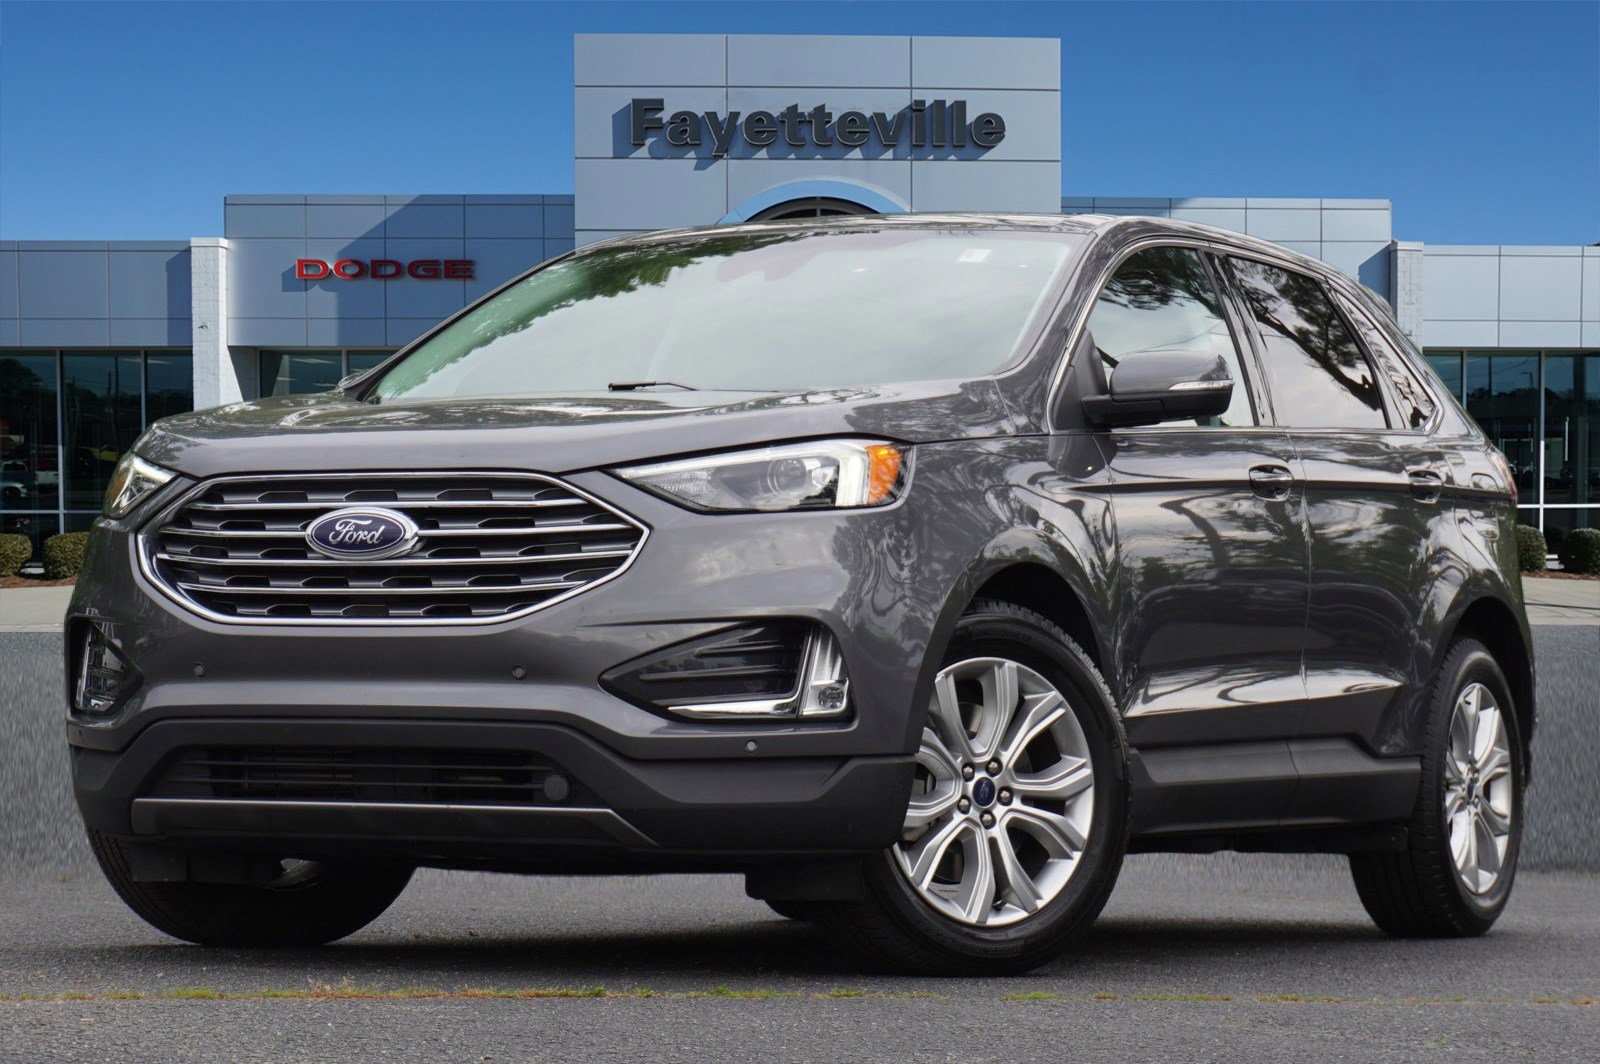 2022 Ford Edge Fayetteville NC